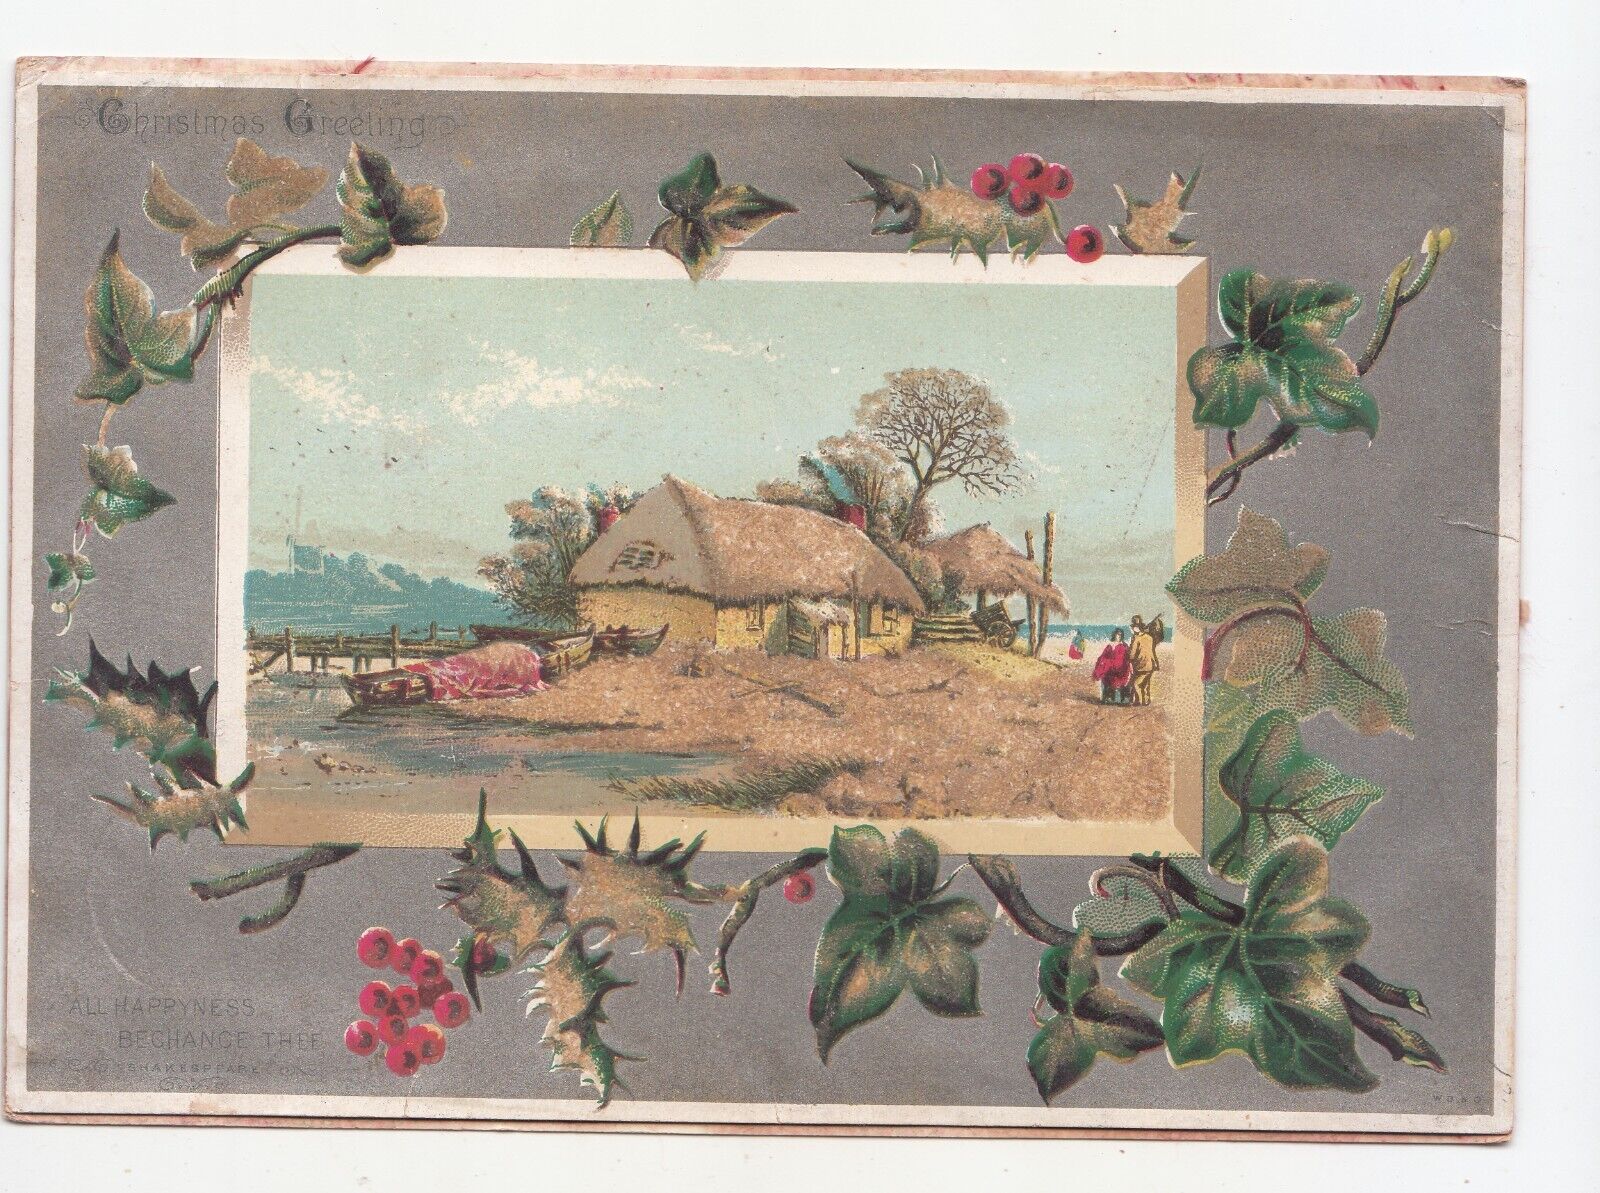 Christmas Wish All Happiness 2 Sided 2 piece Vict Card c1880s